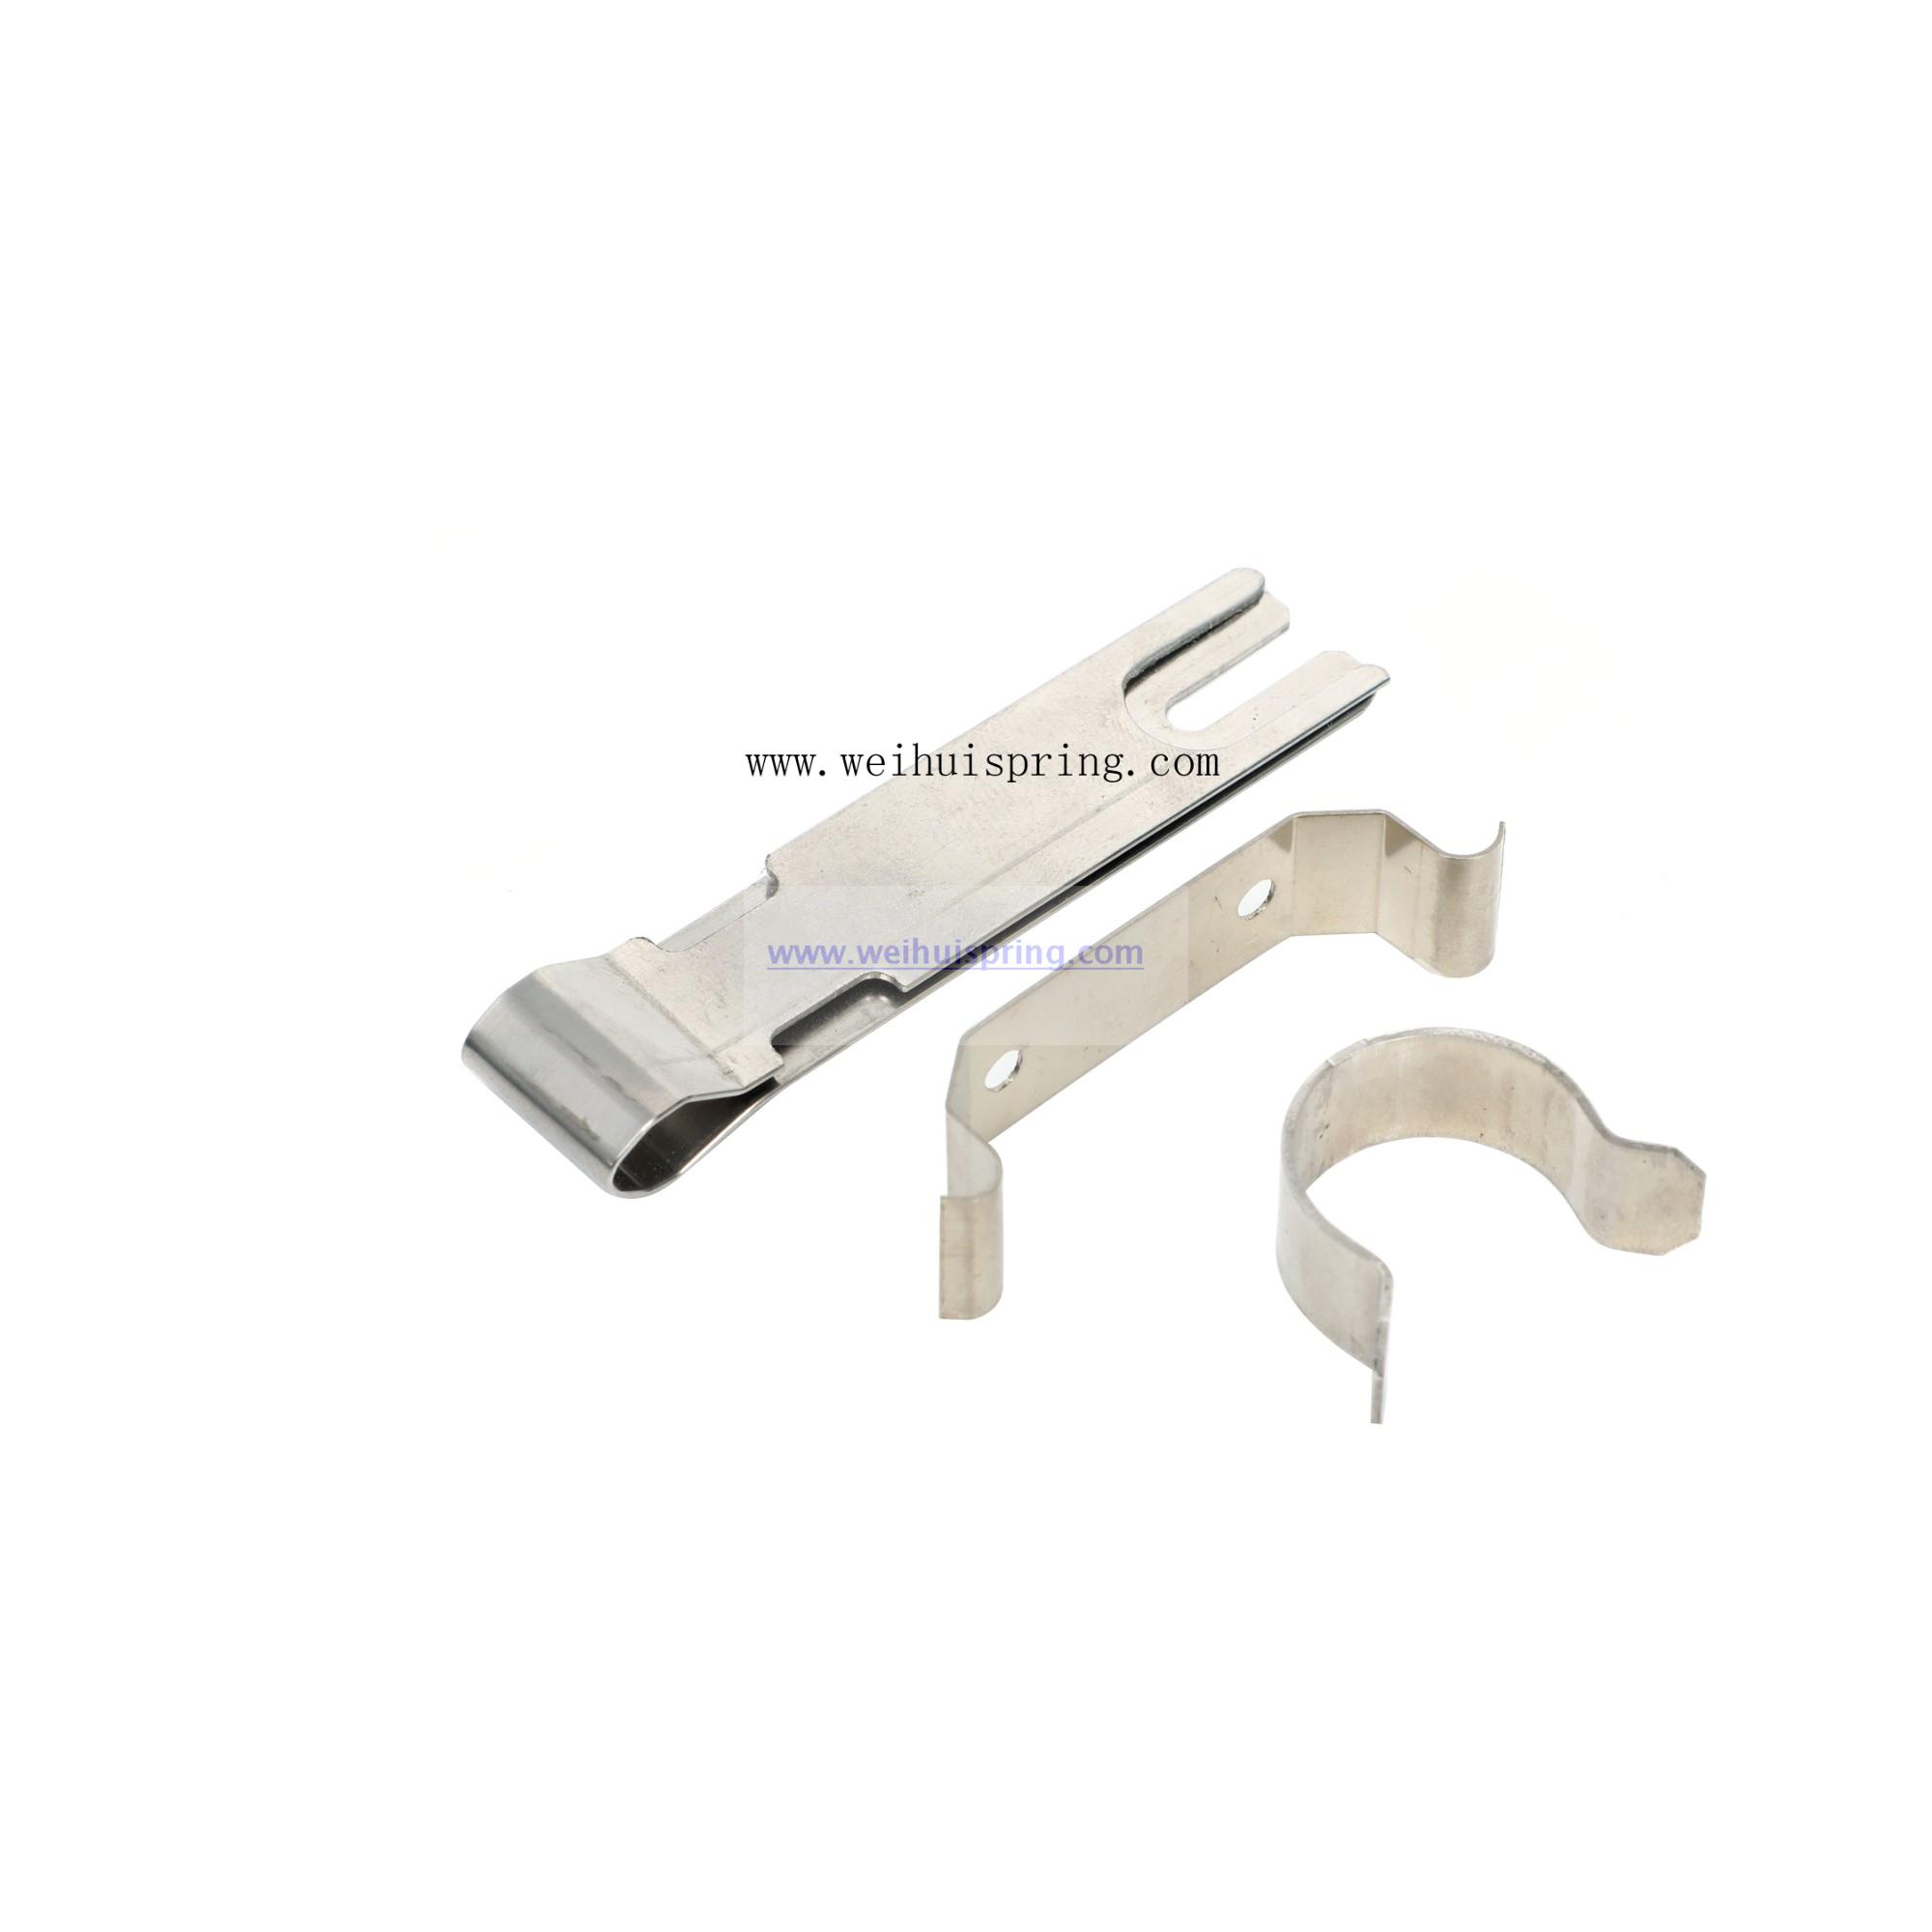 Customize high quality stainless steel flat metal clip spring 